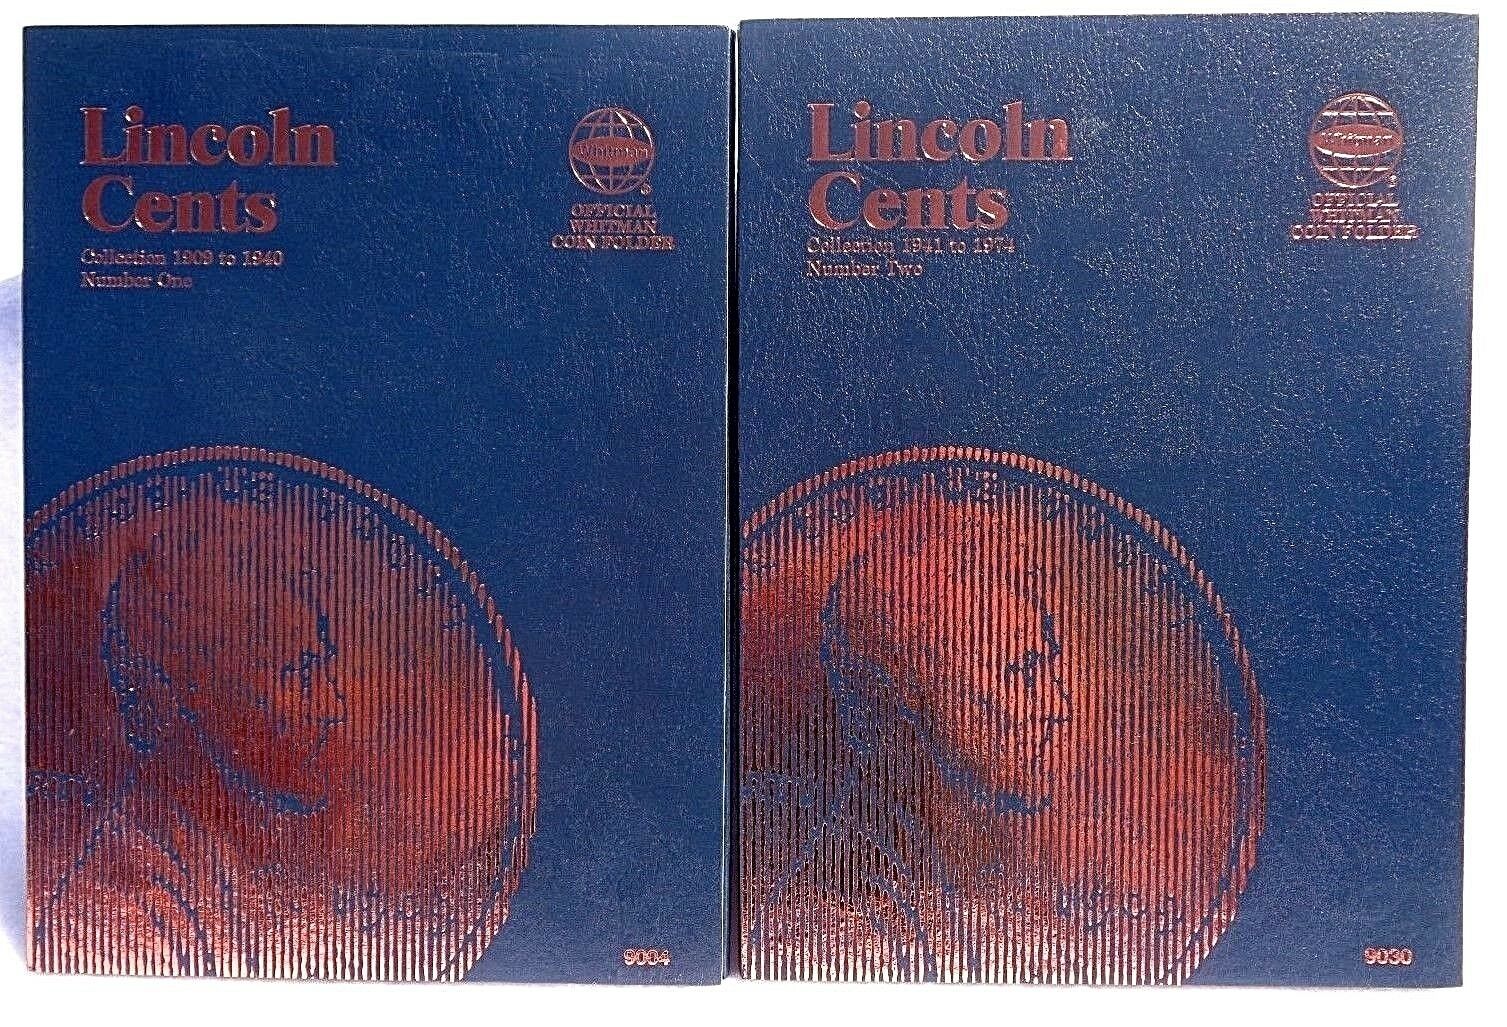 Whitman Lincoln Cent #1 & 2 1909-1974 Coin Folders, Albums Books